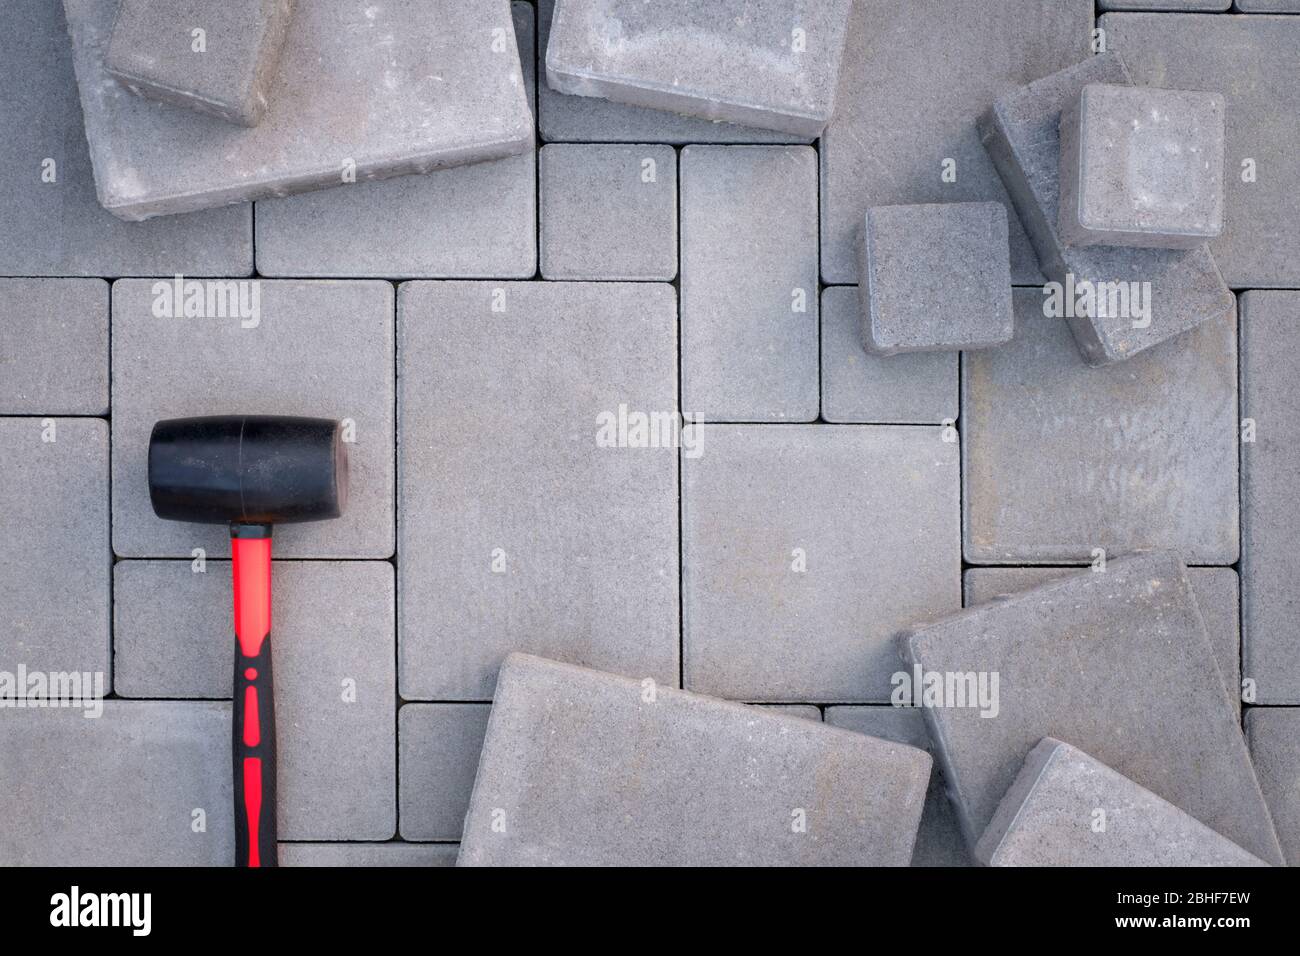 Paving stones paving background. Installing tools rubber hammer on foreground Stock Photo